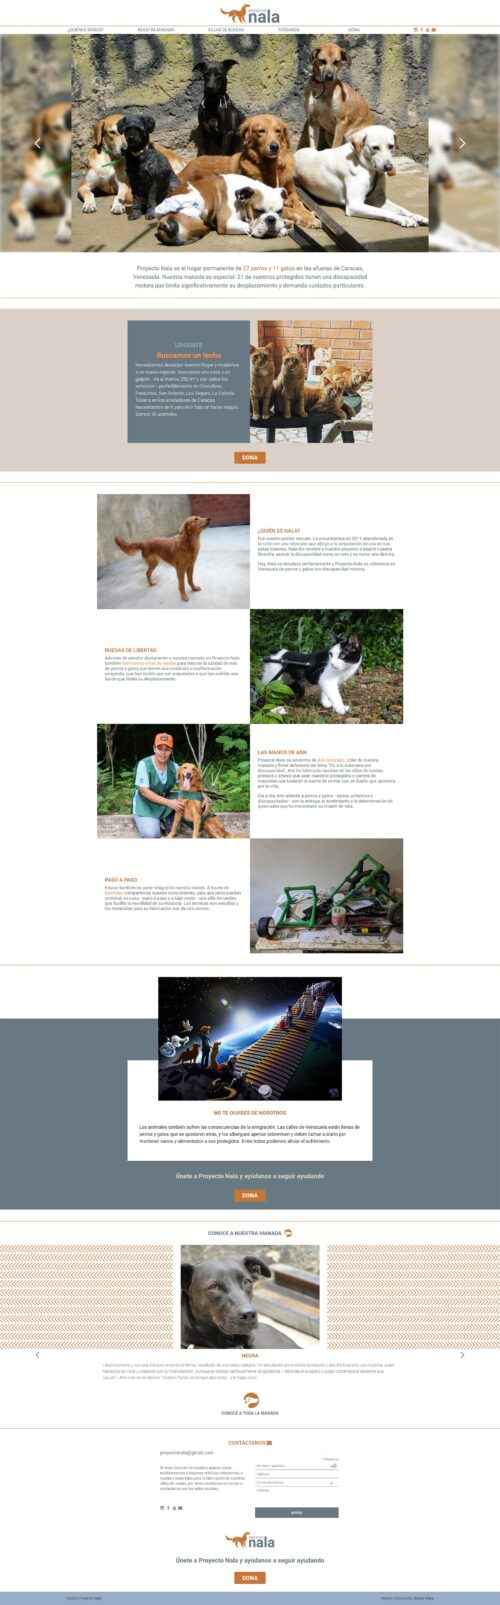 Proyecto Nala | New website for the permanent home of 27 dogs and 11 cats with disabilities. Developed with WordPress with bootstrap 4 and sass. Responsive, with infinite scrolling and mansory.